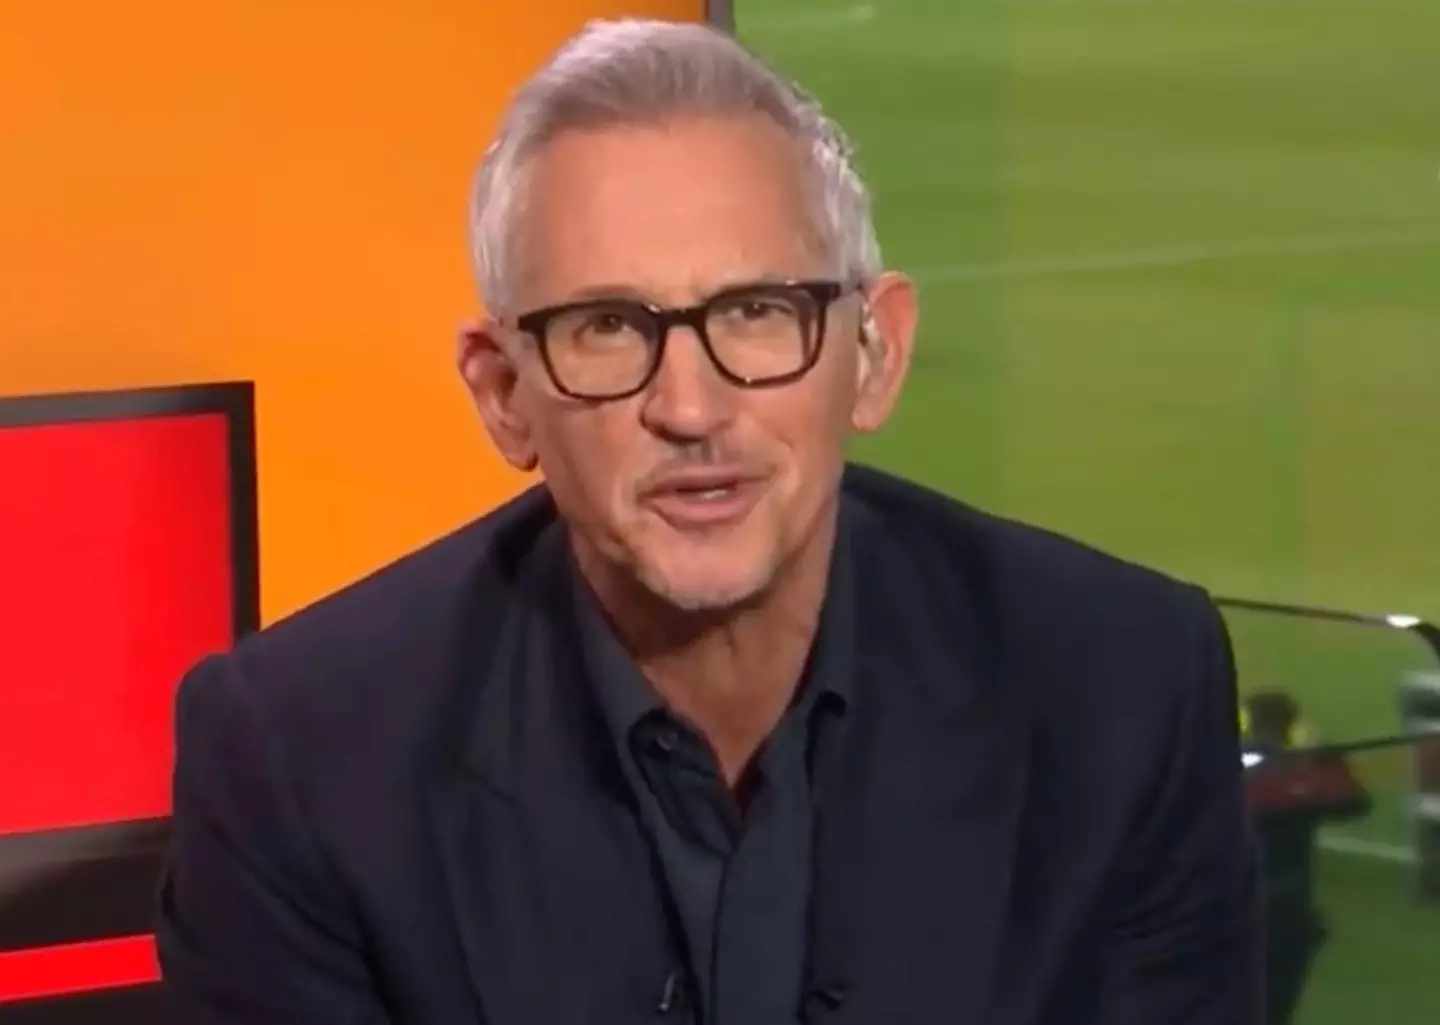 Gary Lineker is taking a step back from Match of The Day.